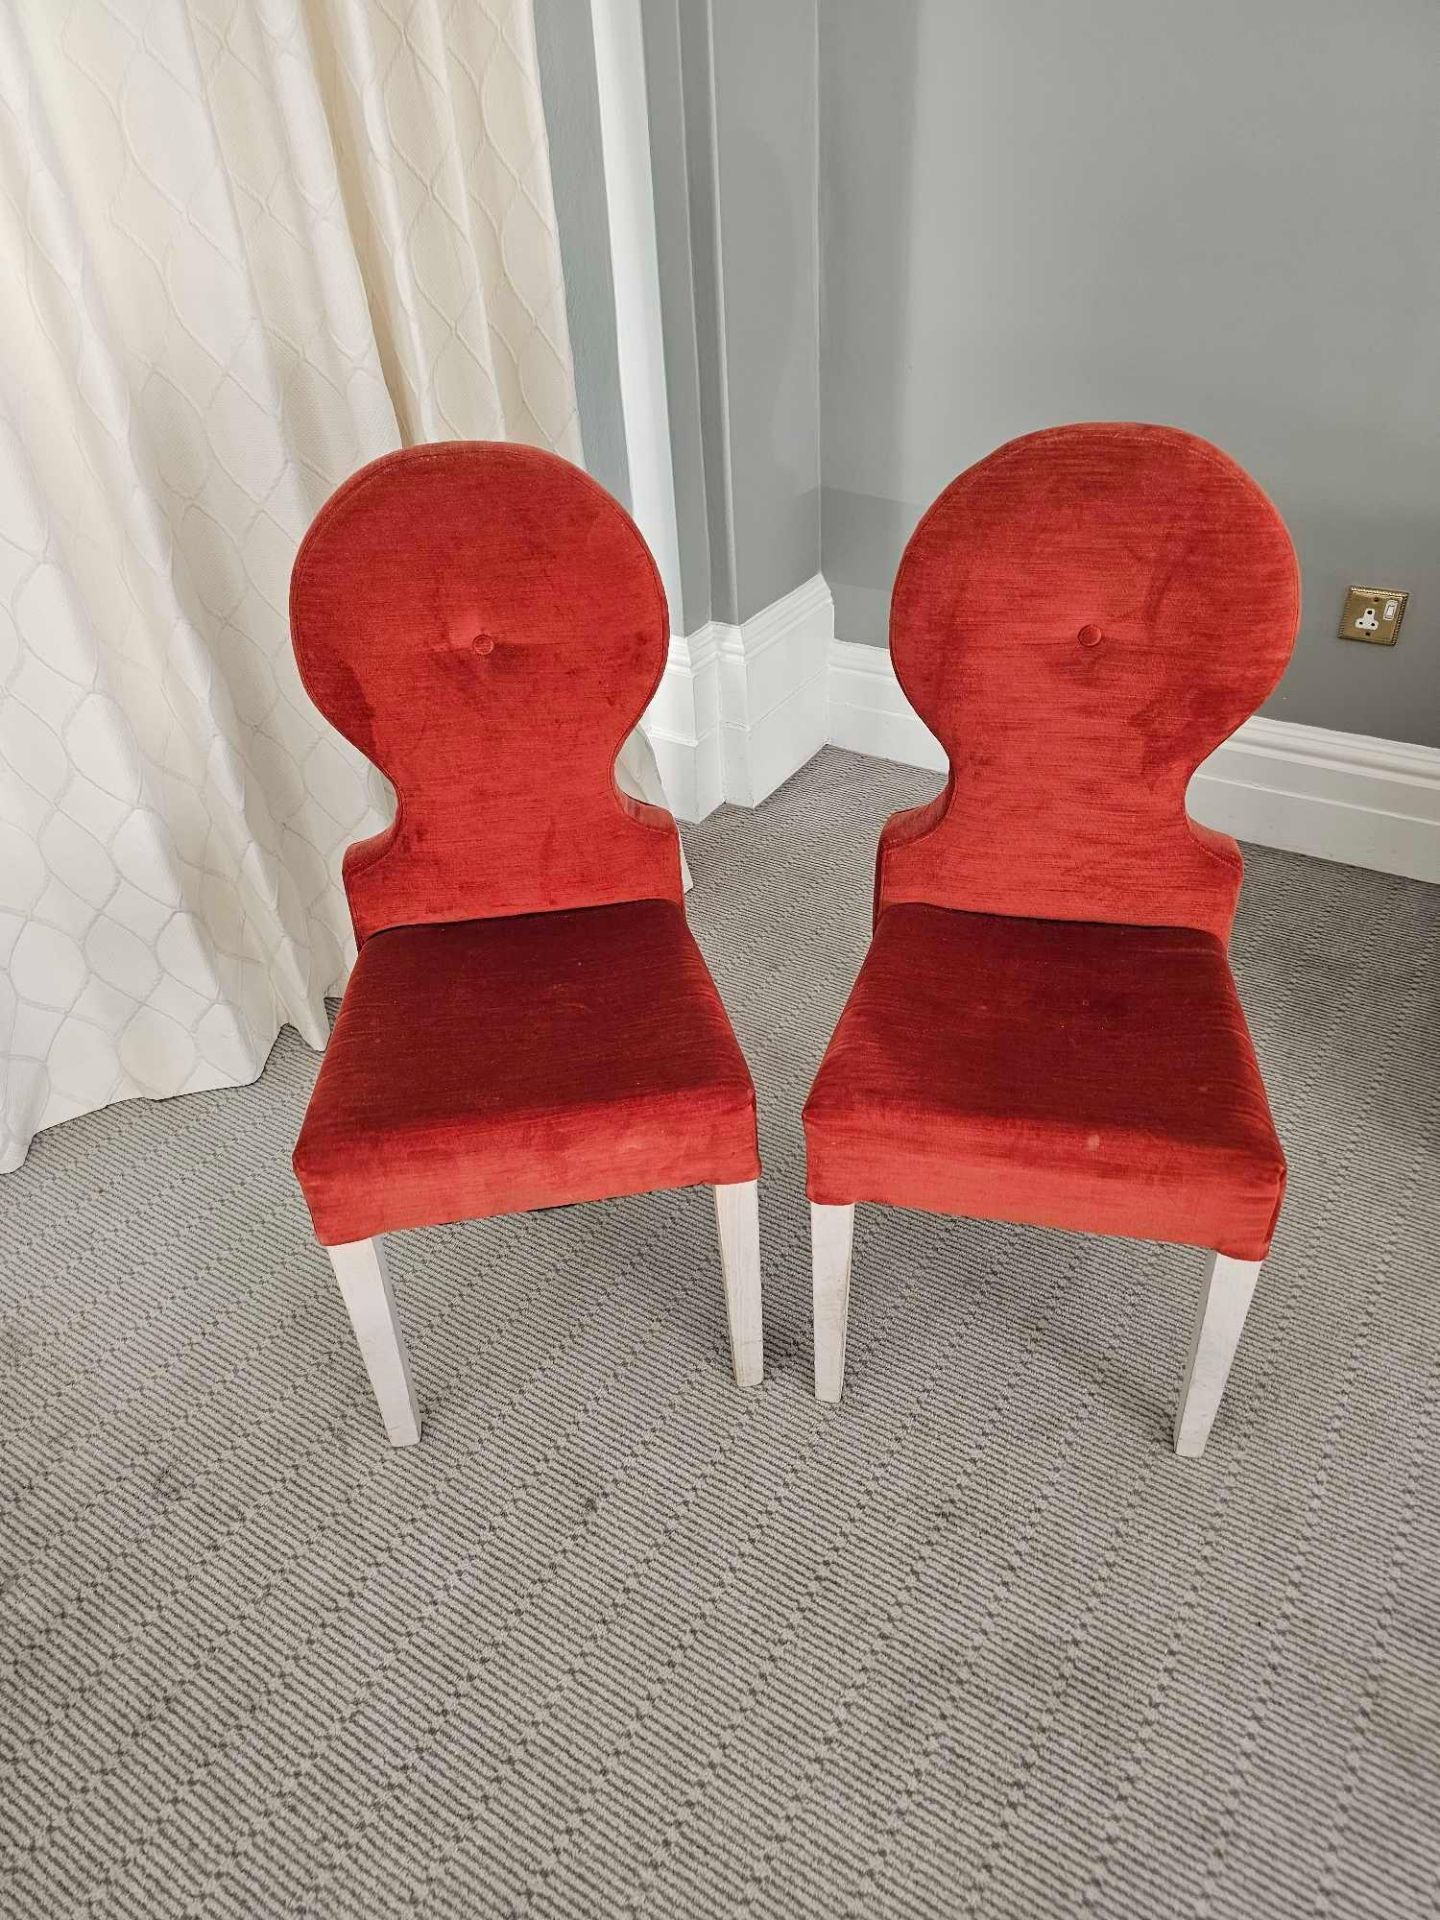 A Pair Of Chairs A Take On The Classic Spoonback Chair Features A Hardwood Frame Upholstered In A - Image 2 of 4